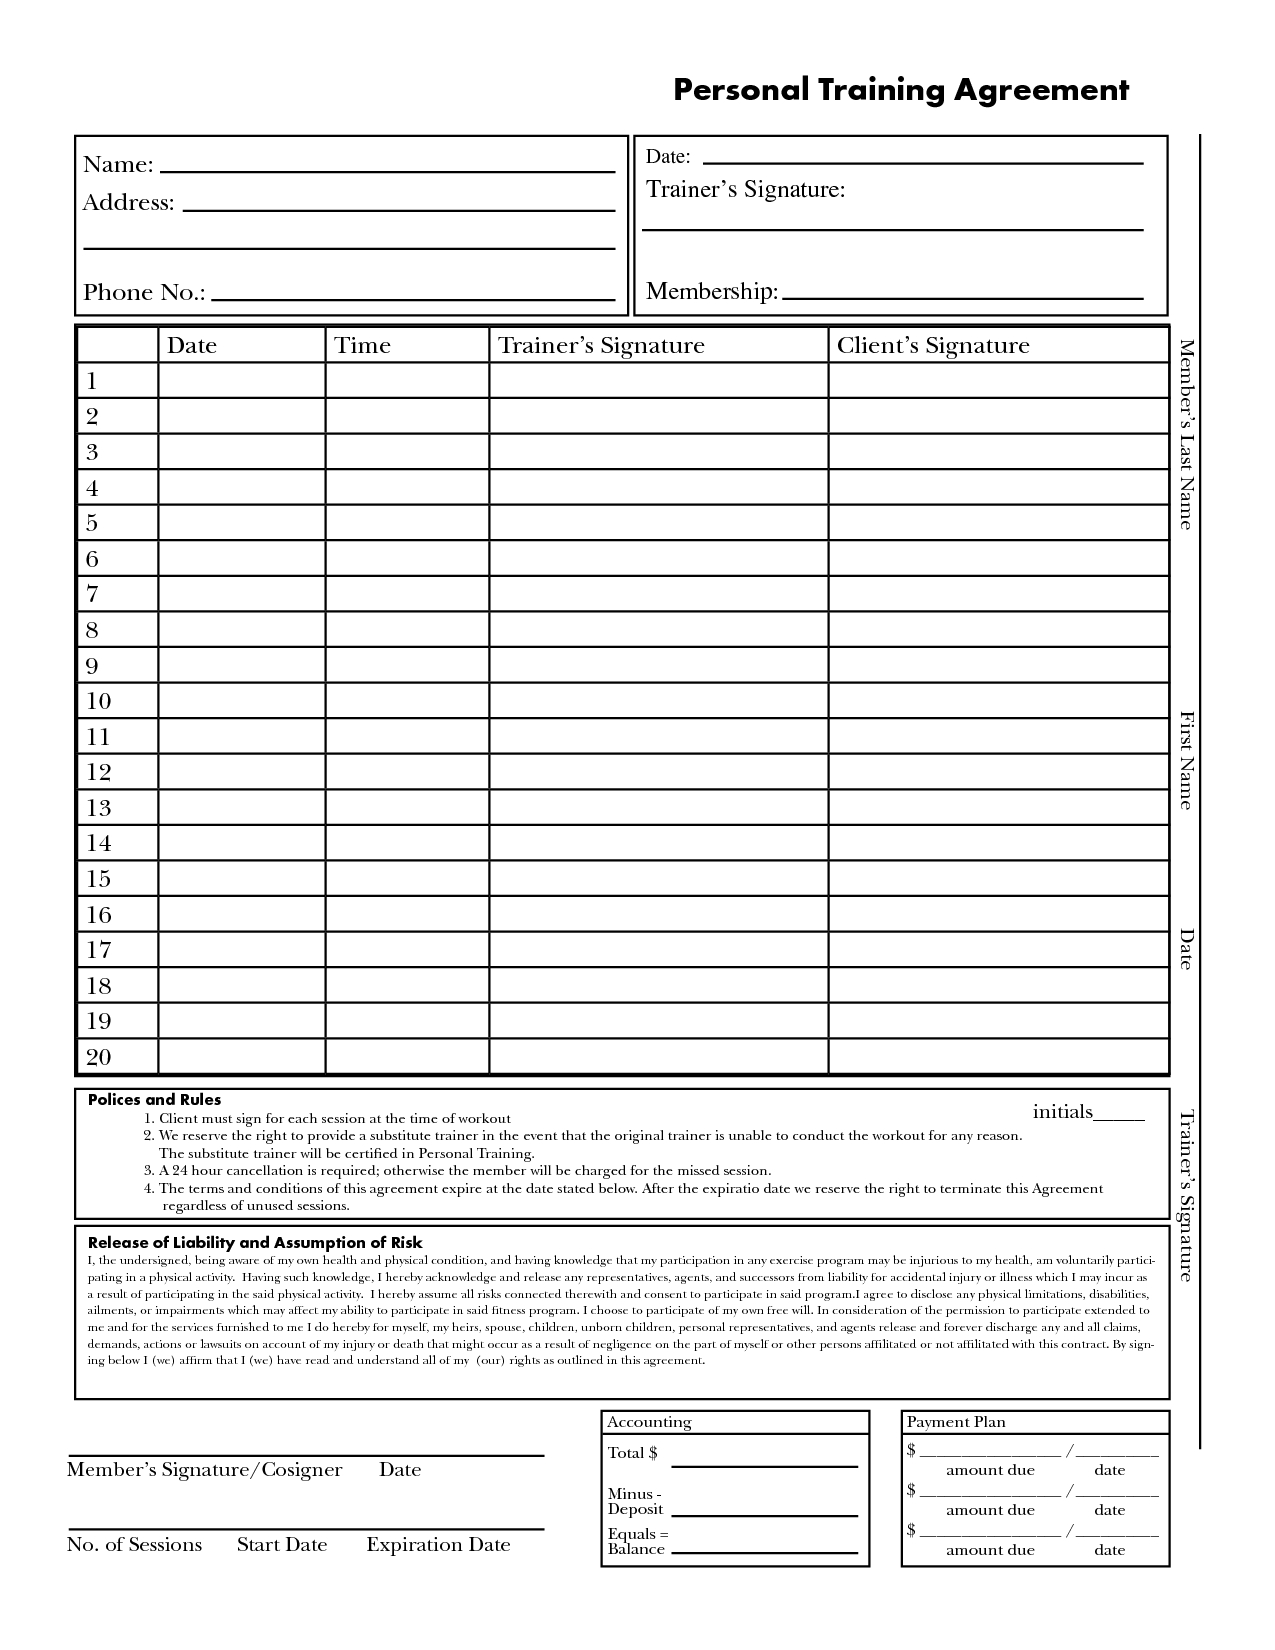 Personal Training Contract Template - Free Printable Documents throughout Fitness Instructor Contract Agreement Template